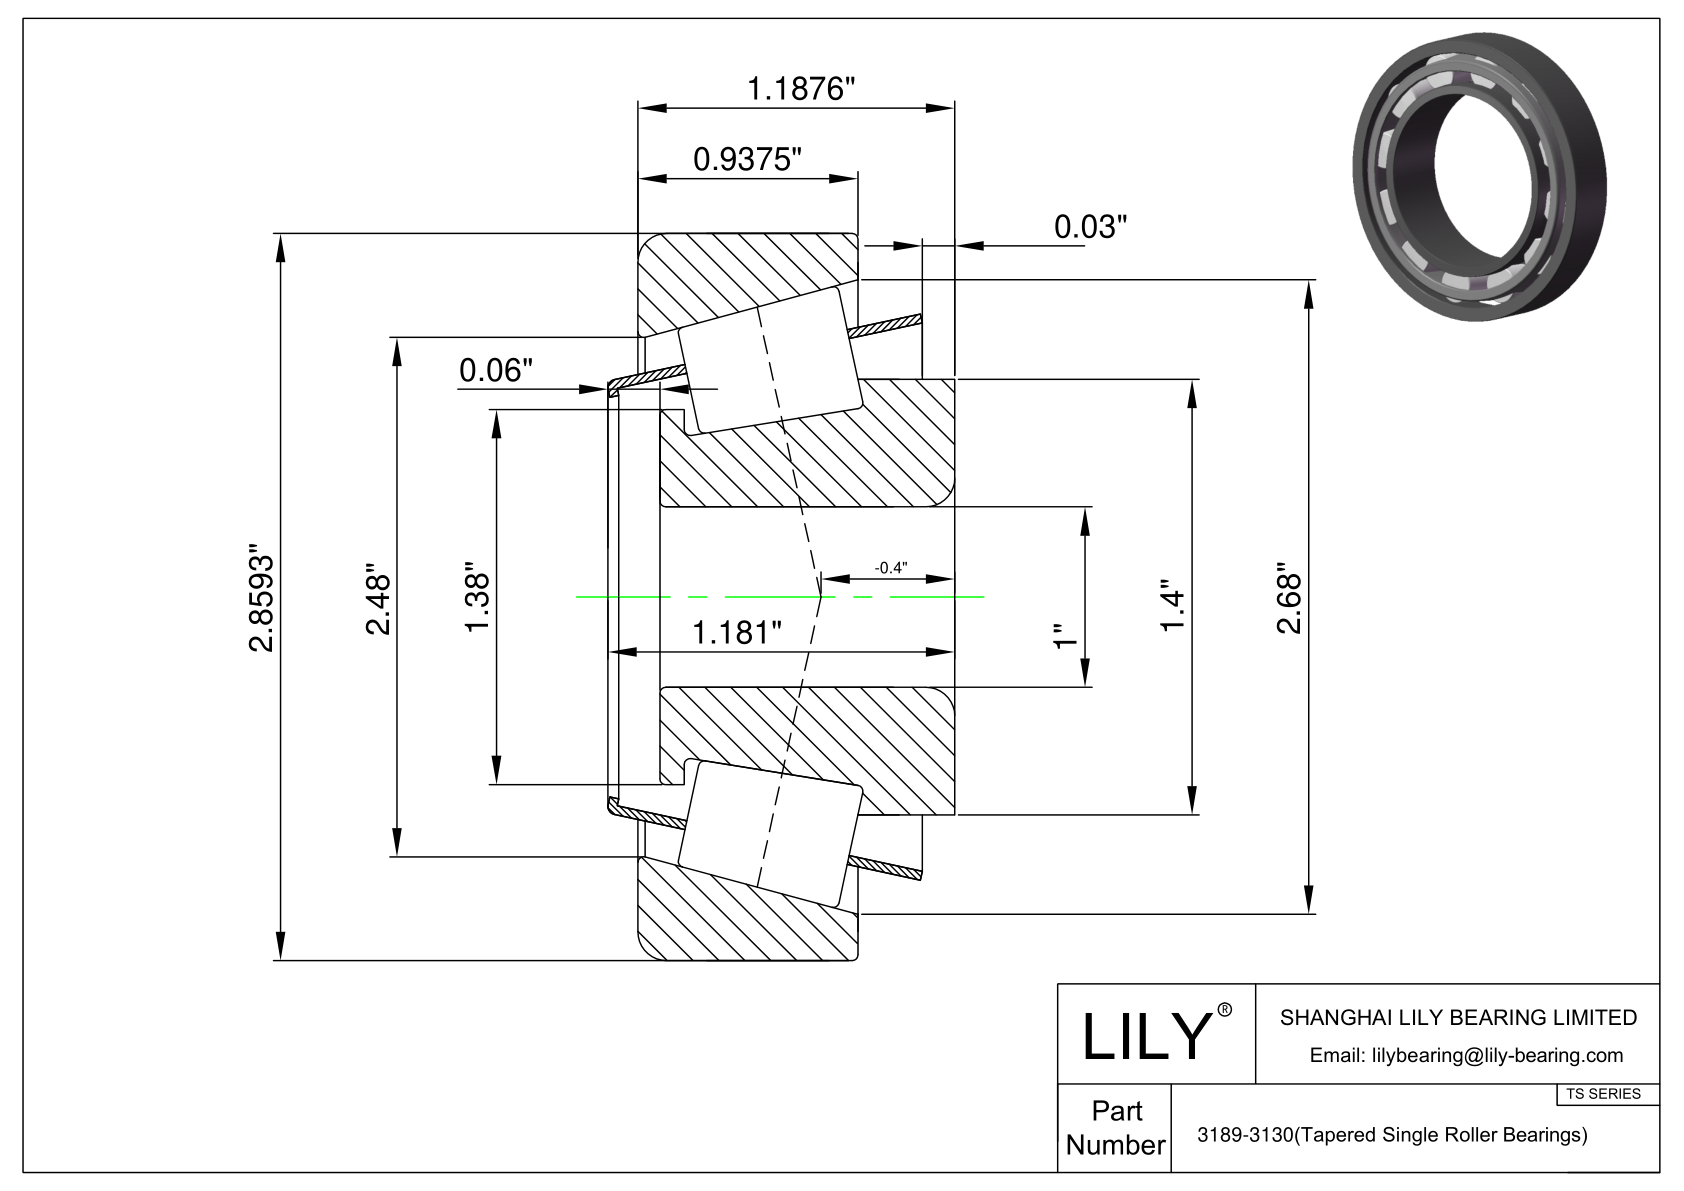 3189-3130 TS (Tapered Single Roller Bearings) (Imperial) cad drawing